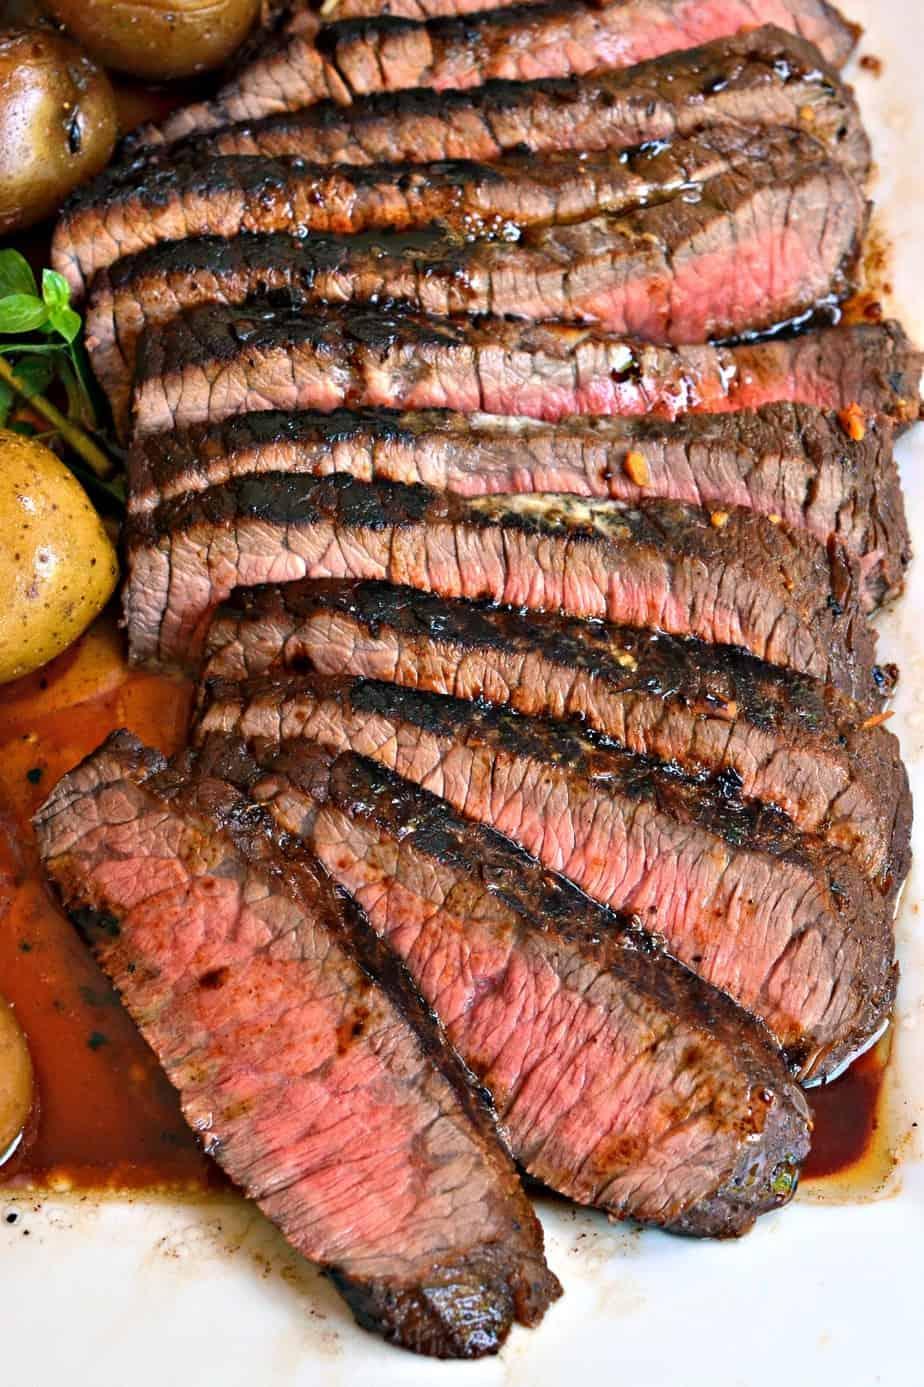 This London Broil recipe combines an easy tenderizing marinade with tips on cooking this less expensive cut of beef.